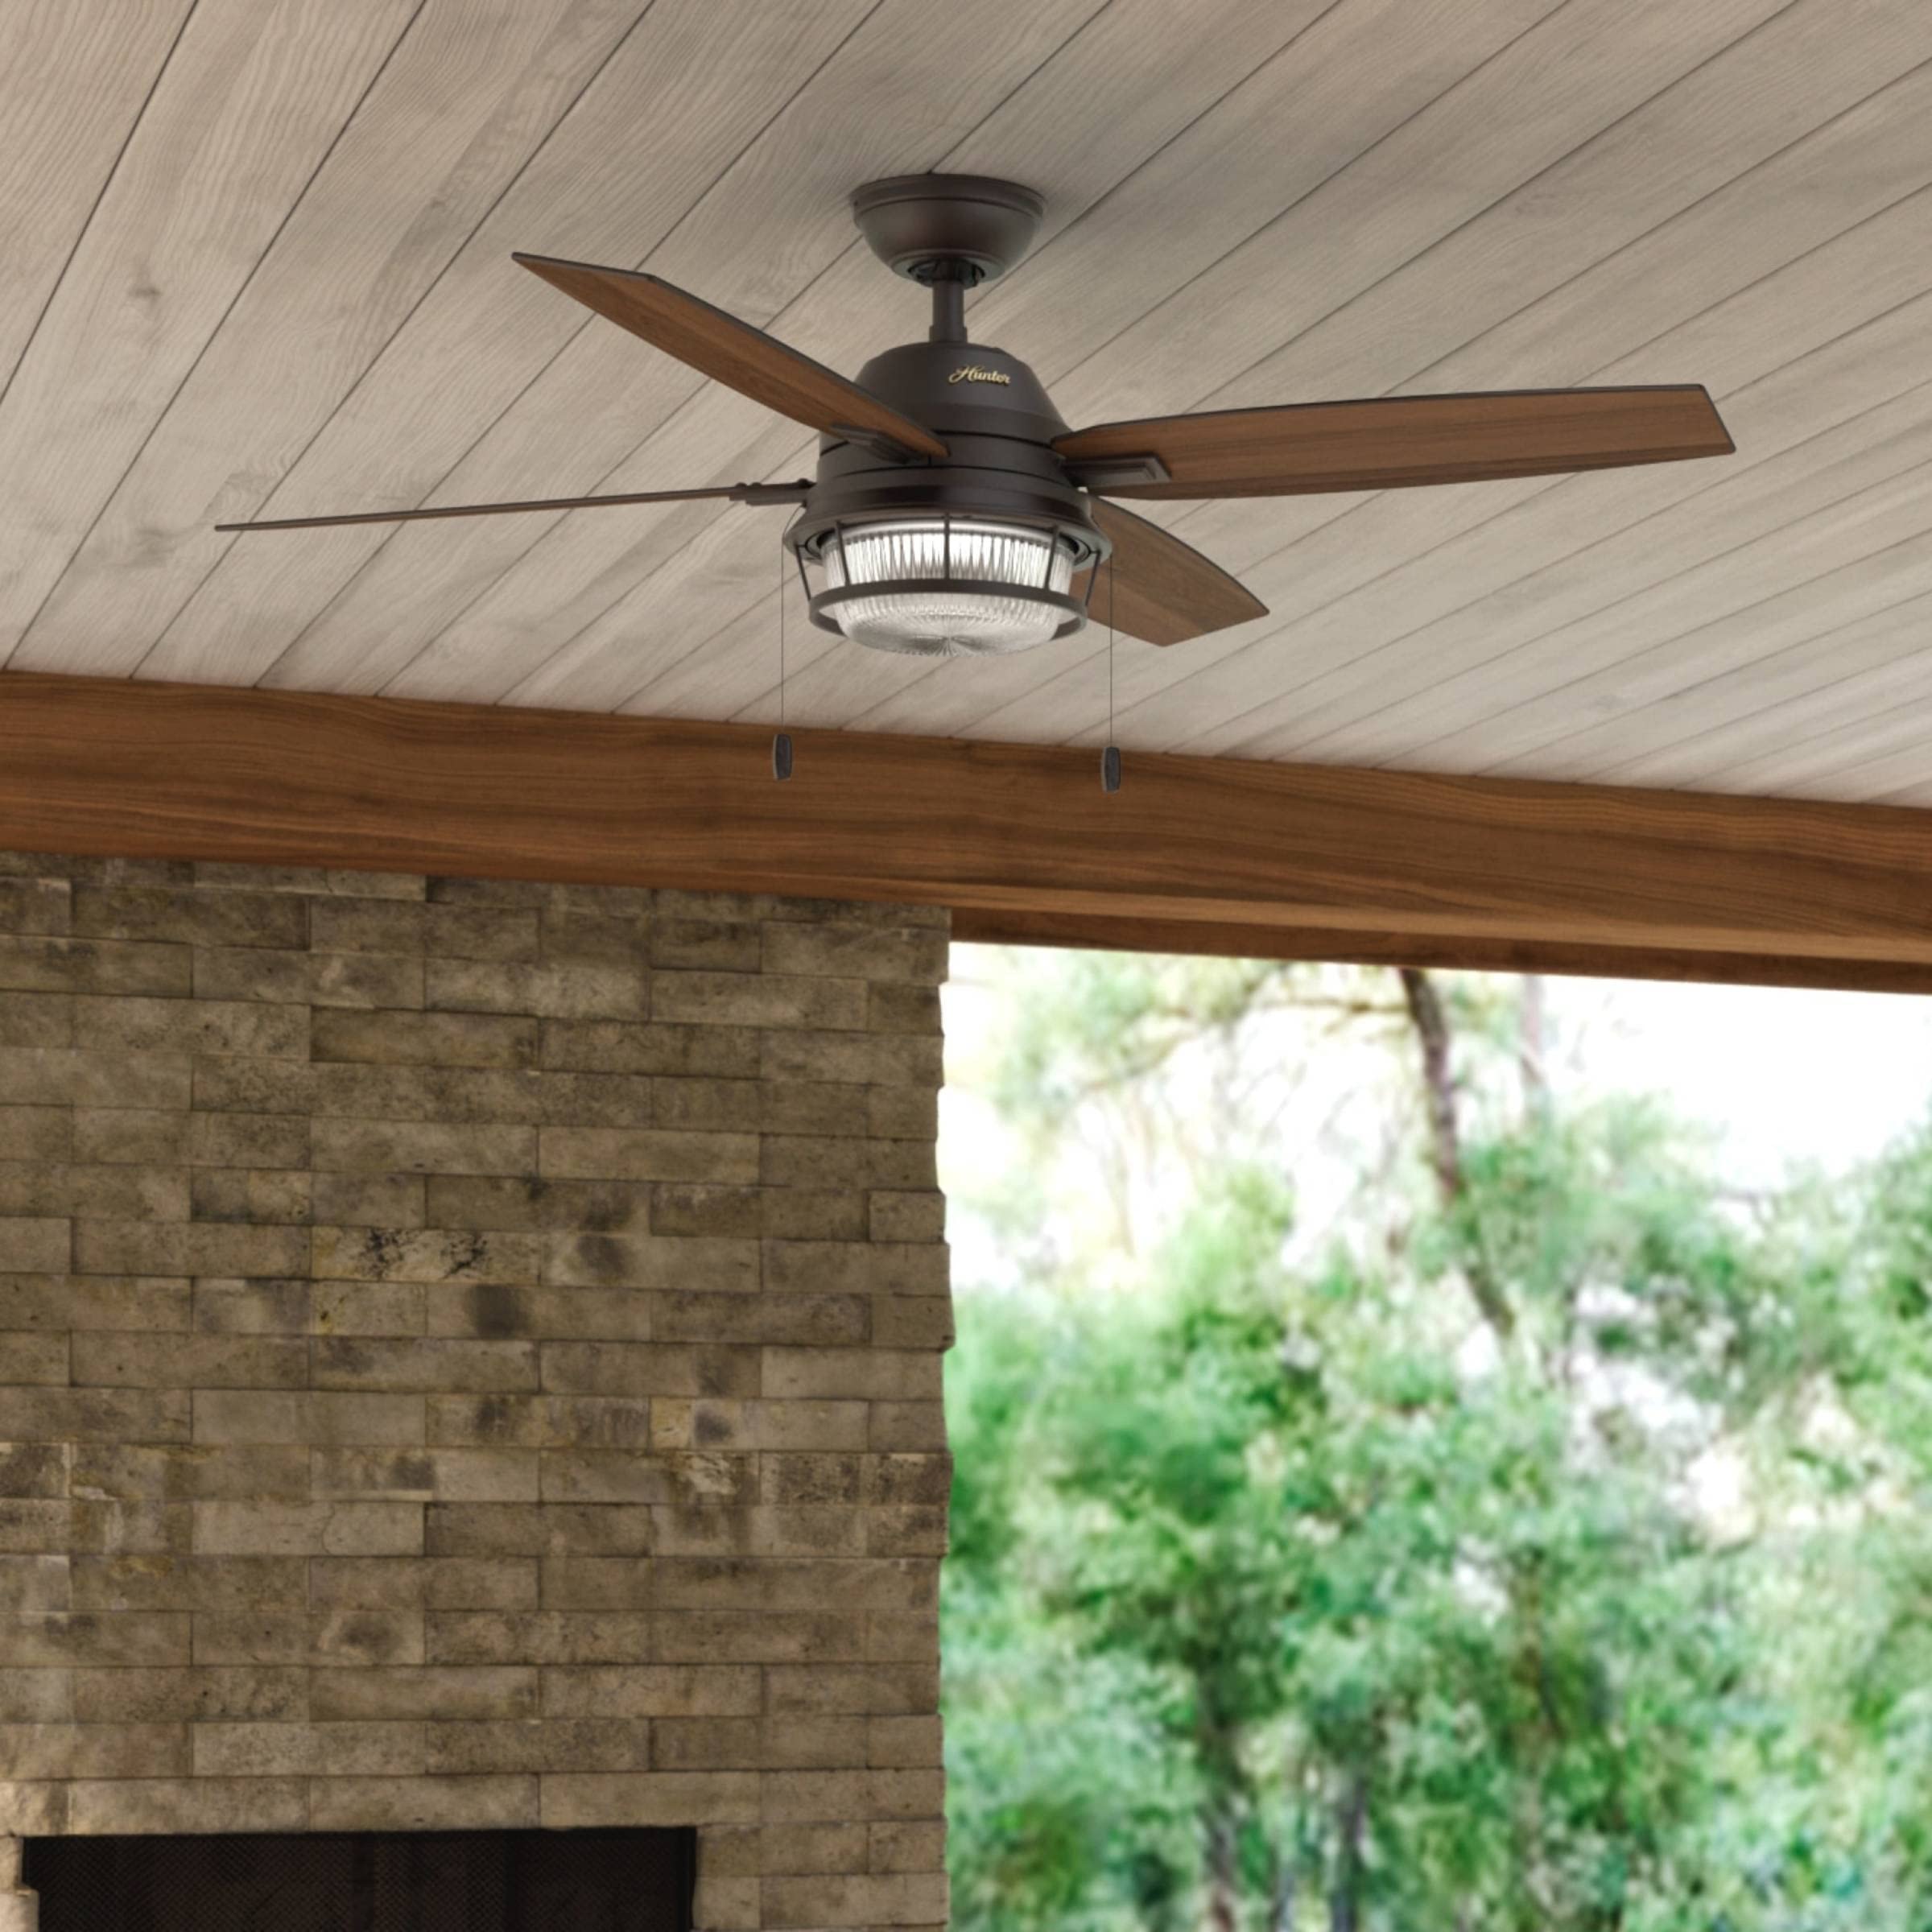 Hunter Fan Company, 59214, 52 inch Ocala Noble Bronze Indoor / Outdoor Ceiling Fan with LED Light Kit and Pull Chain